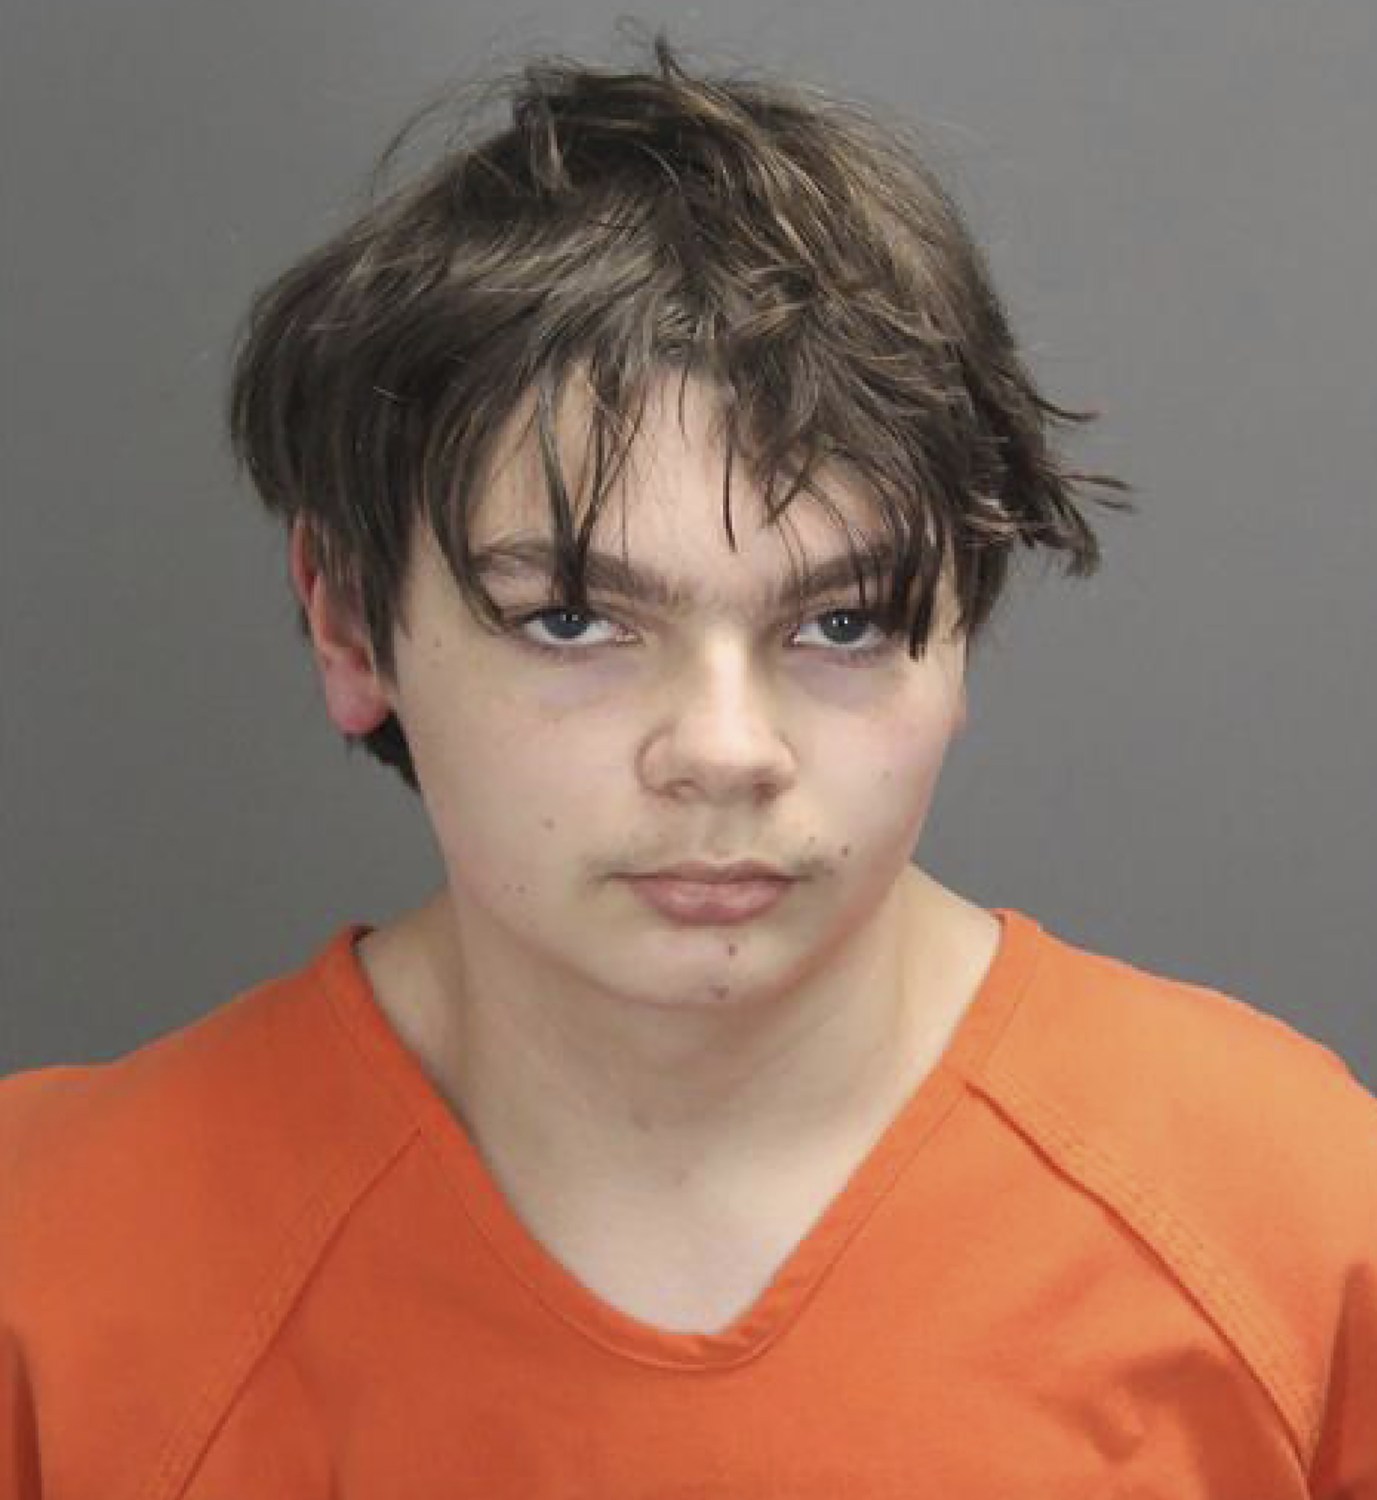 Michigan High School Gunman Ethan Crumbley, 15, Is Arraigned As An Adult Terrorist As Police Reveal He Had Meeting With His Parents And Teachers To 'discuss His Behavior' Three Hours Before He Opened Fire In Hallways And Killed Four Classmates